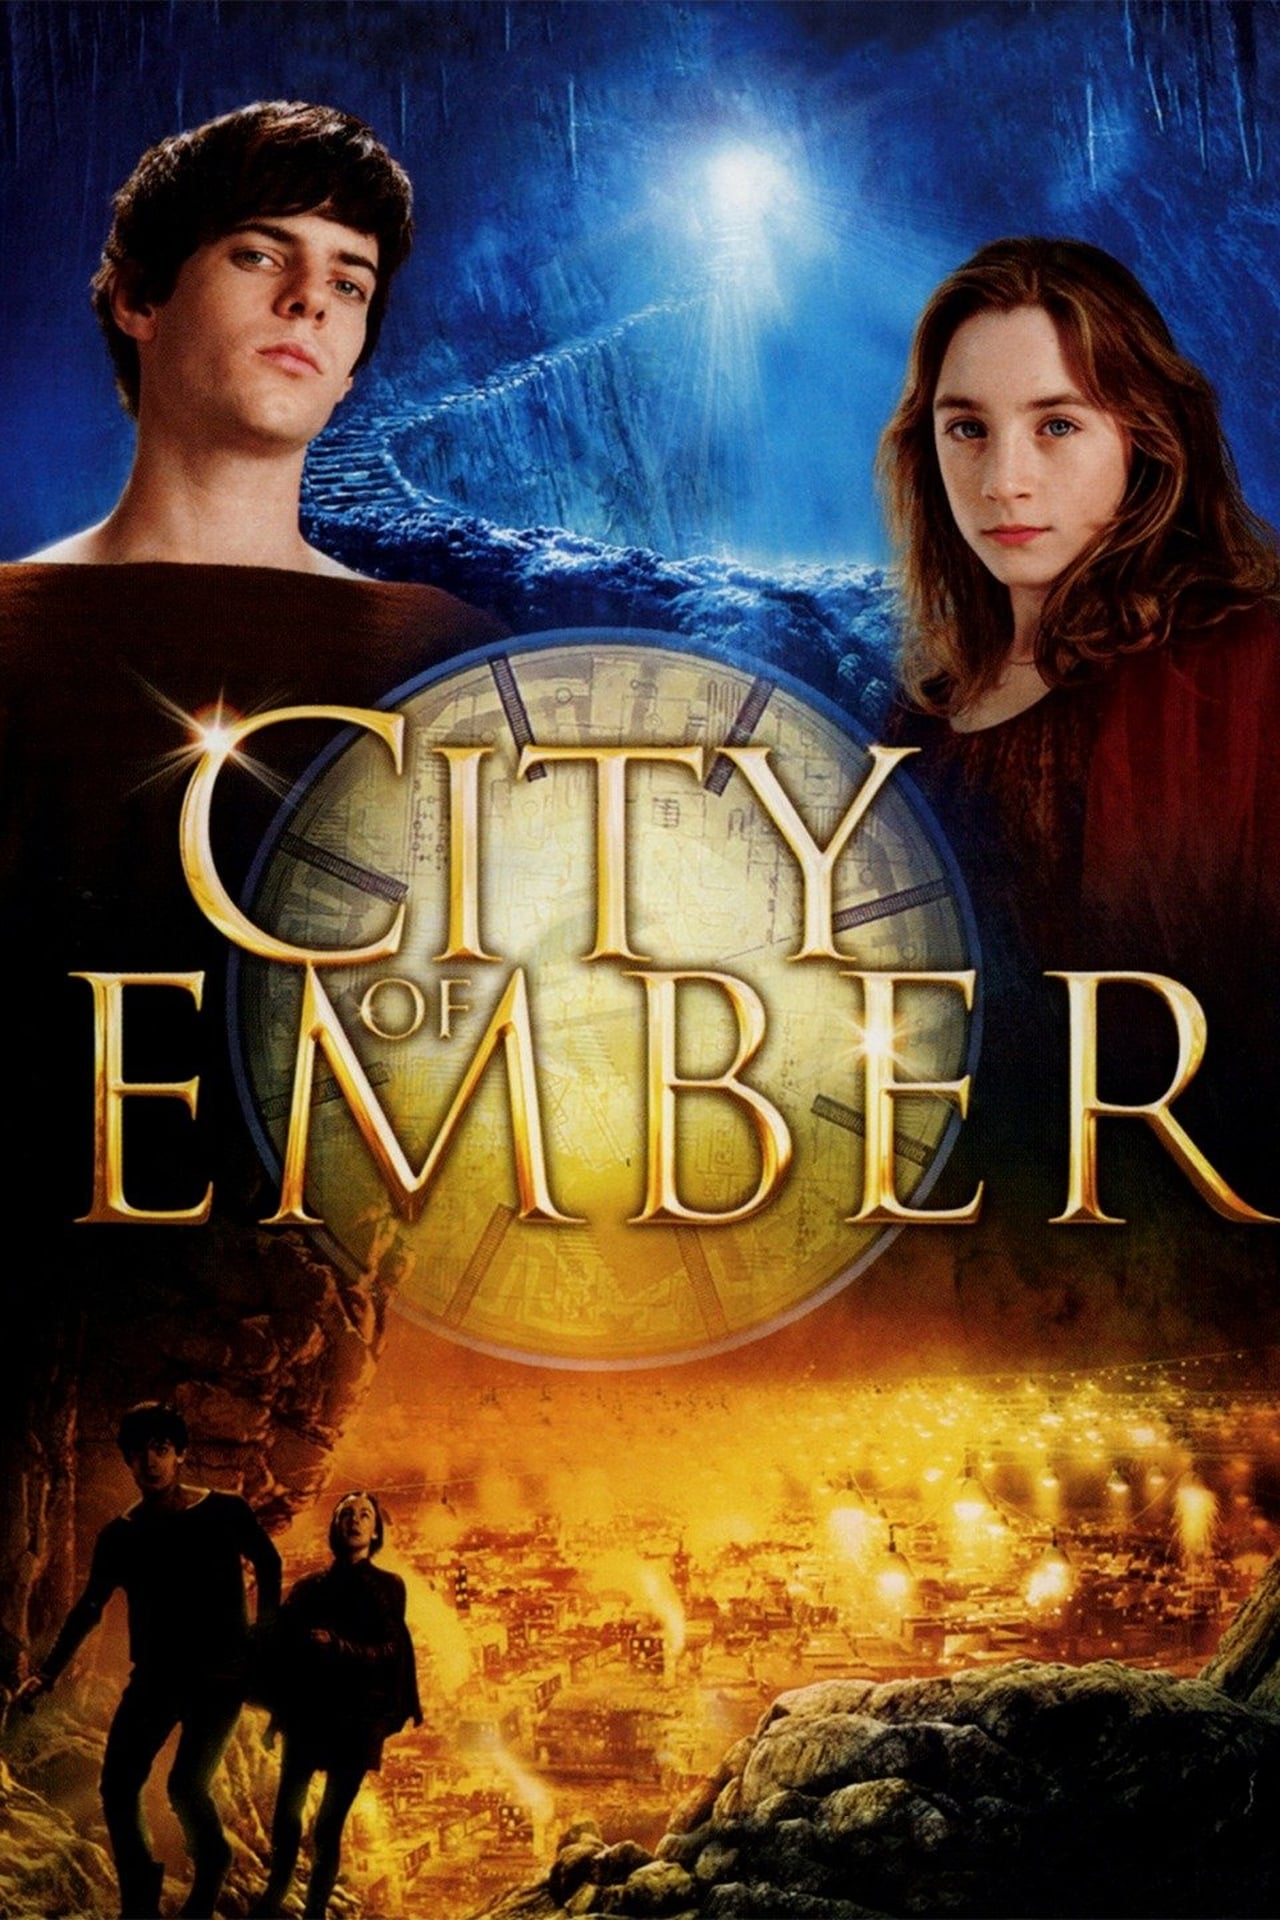 city of ember book